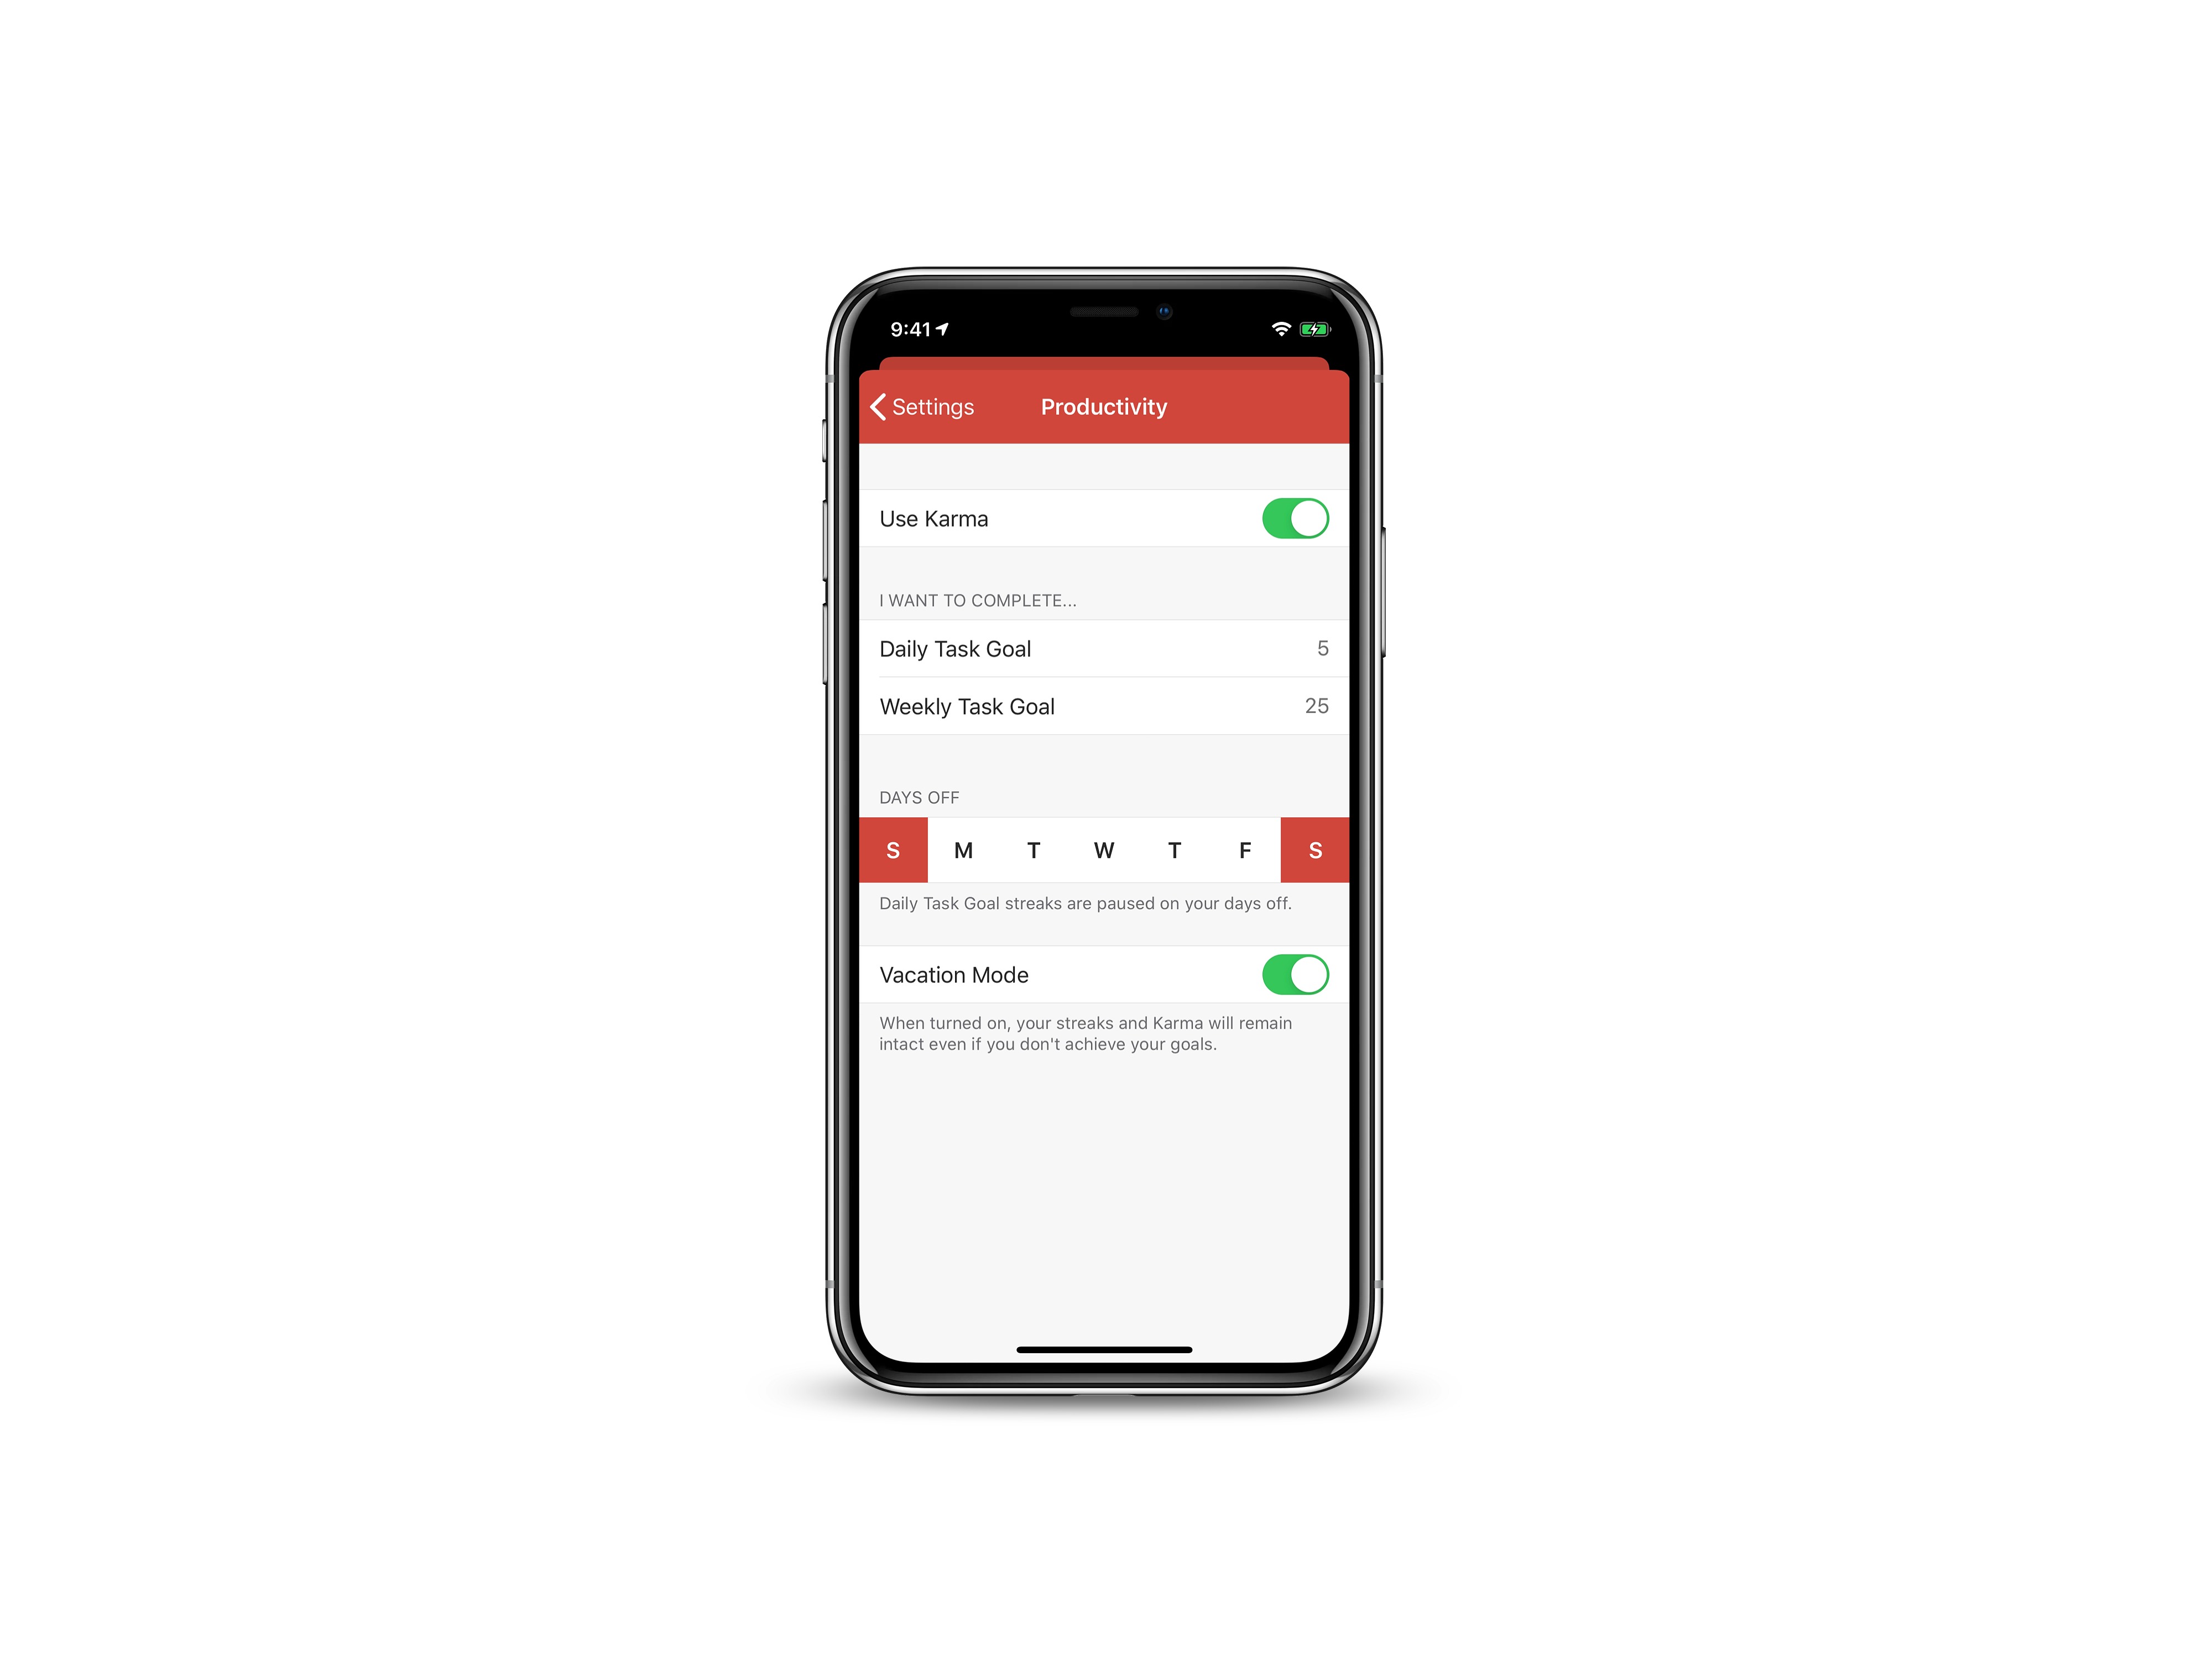 Enable vacation mode in Todoist when you’re off work